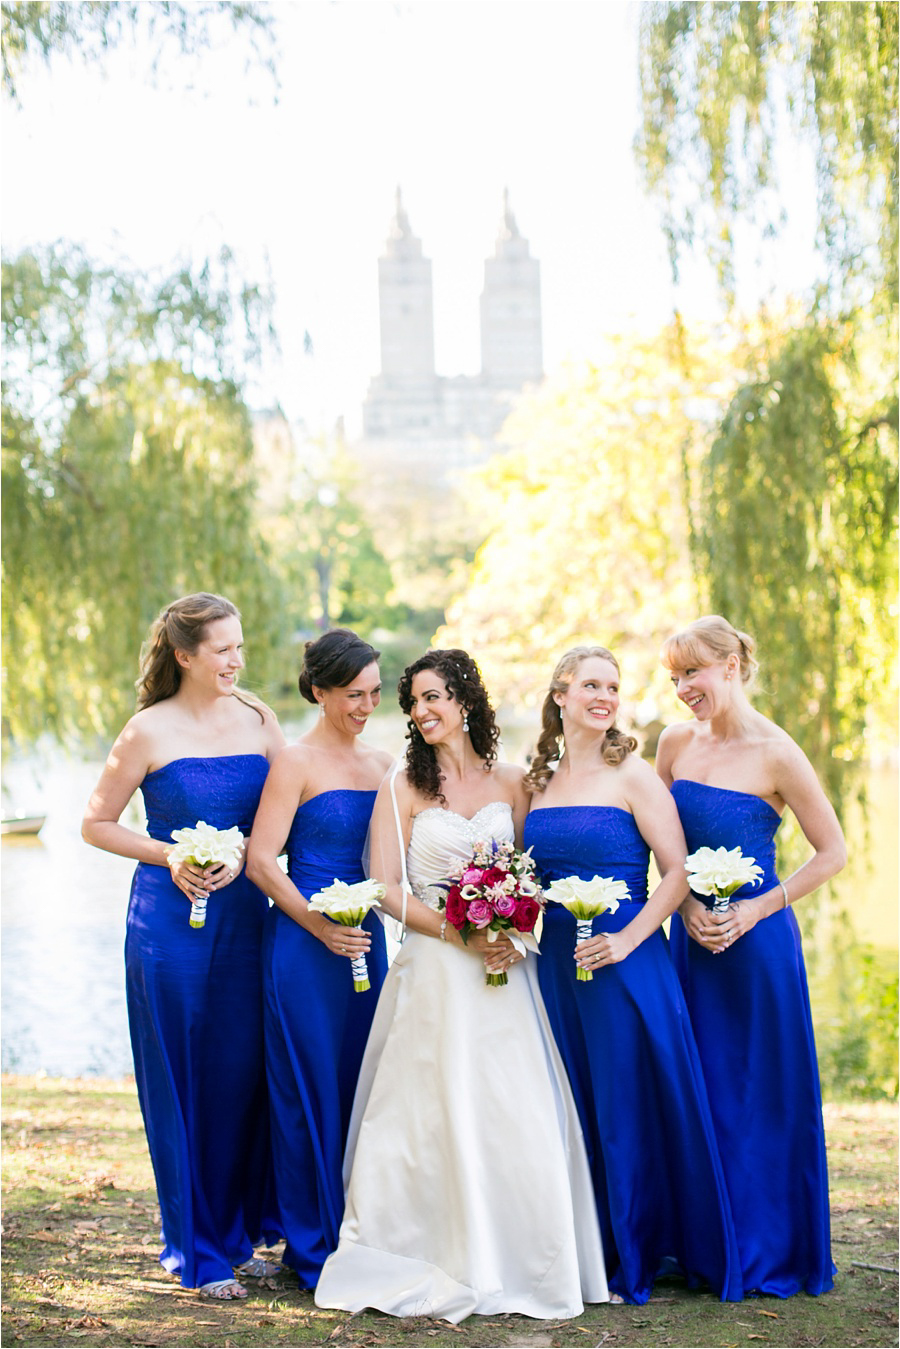 Central Park Boathouse Wedding - Amy Rizzuto Photography-6-2